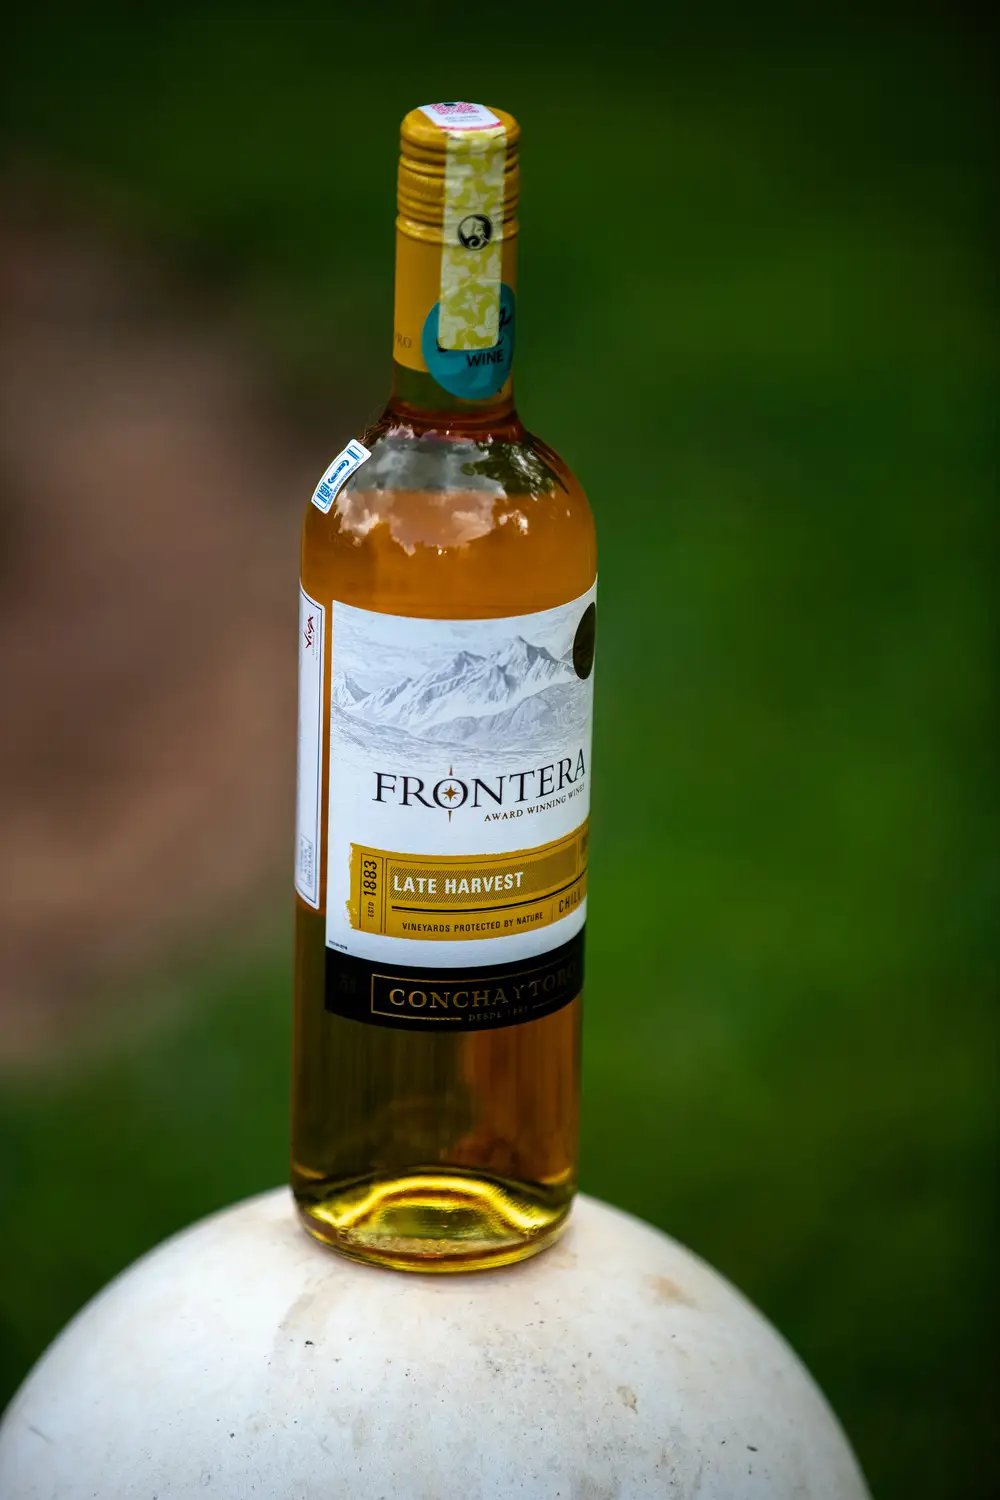 Picture of a bottle of Frontera Wine